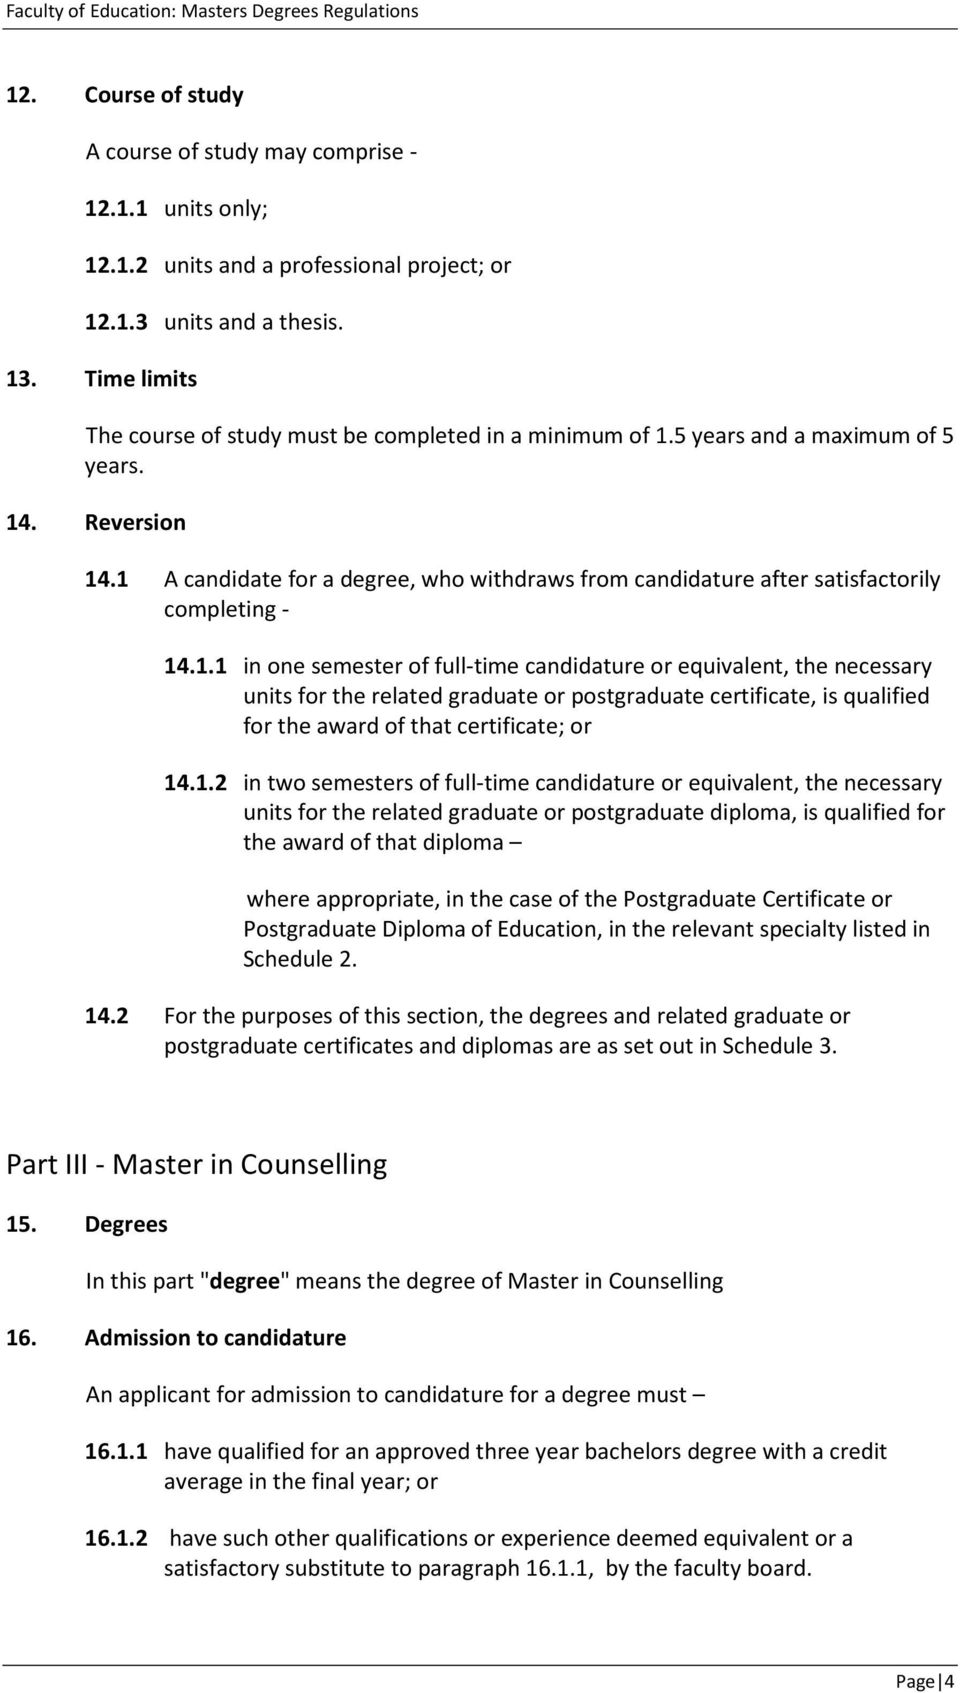 1 A candidate for a degree, who withdraws from candidature after satisfactorily completing - 14.1.1 in one semester of full-time candidature or equivalent, the necessary units for the related graduate or postgraduate certificate, is qualified for the award of that certificate; or 14.